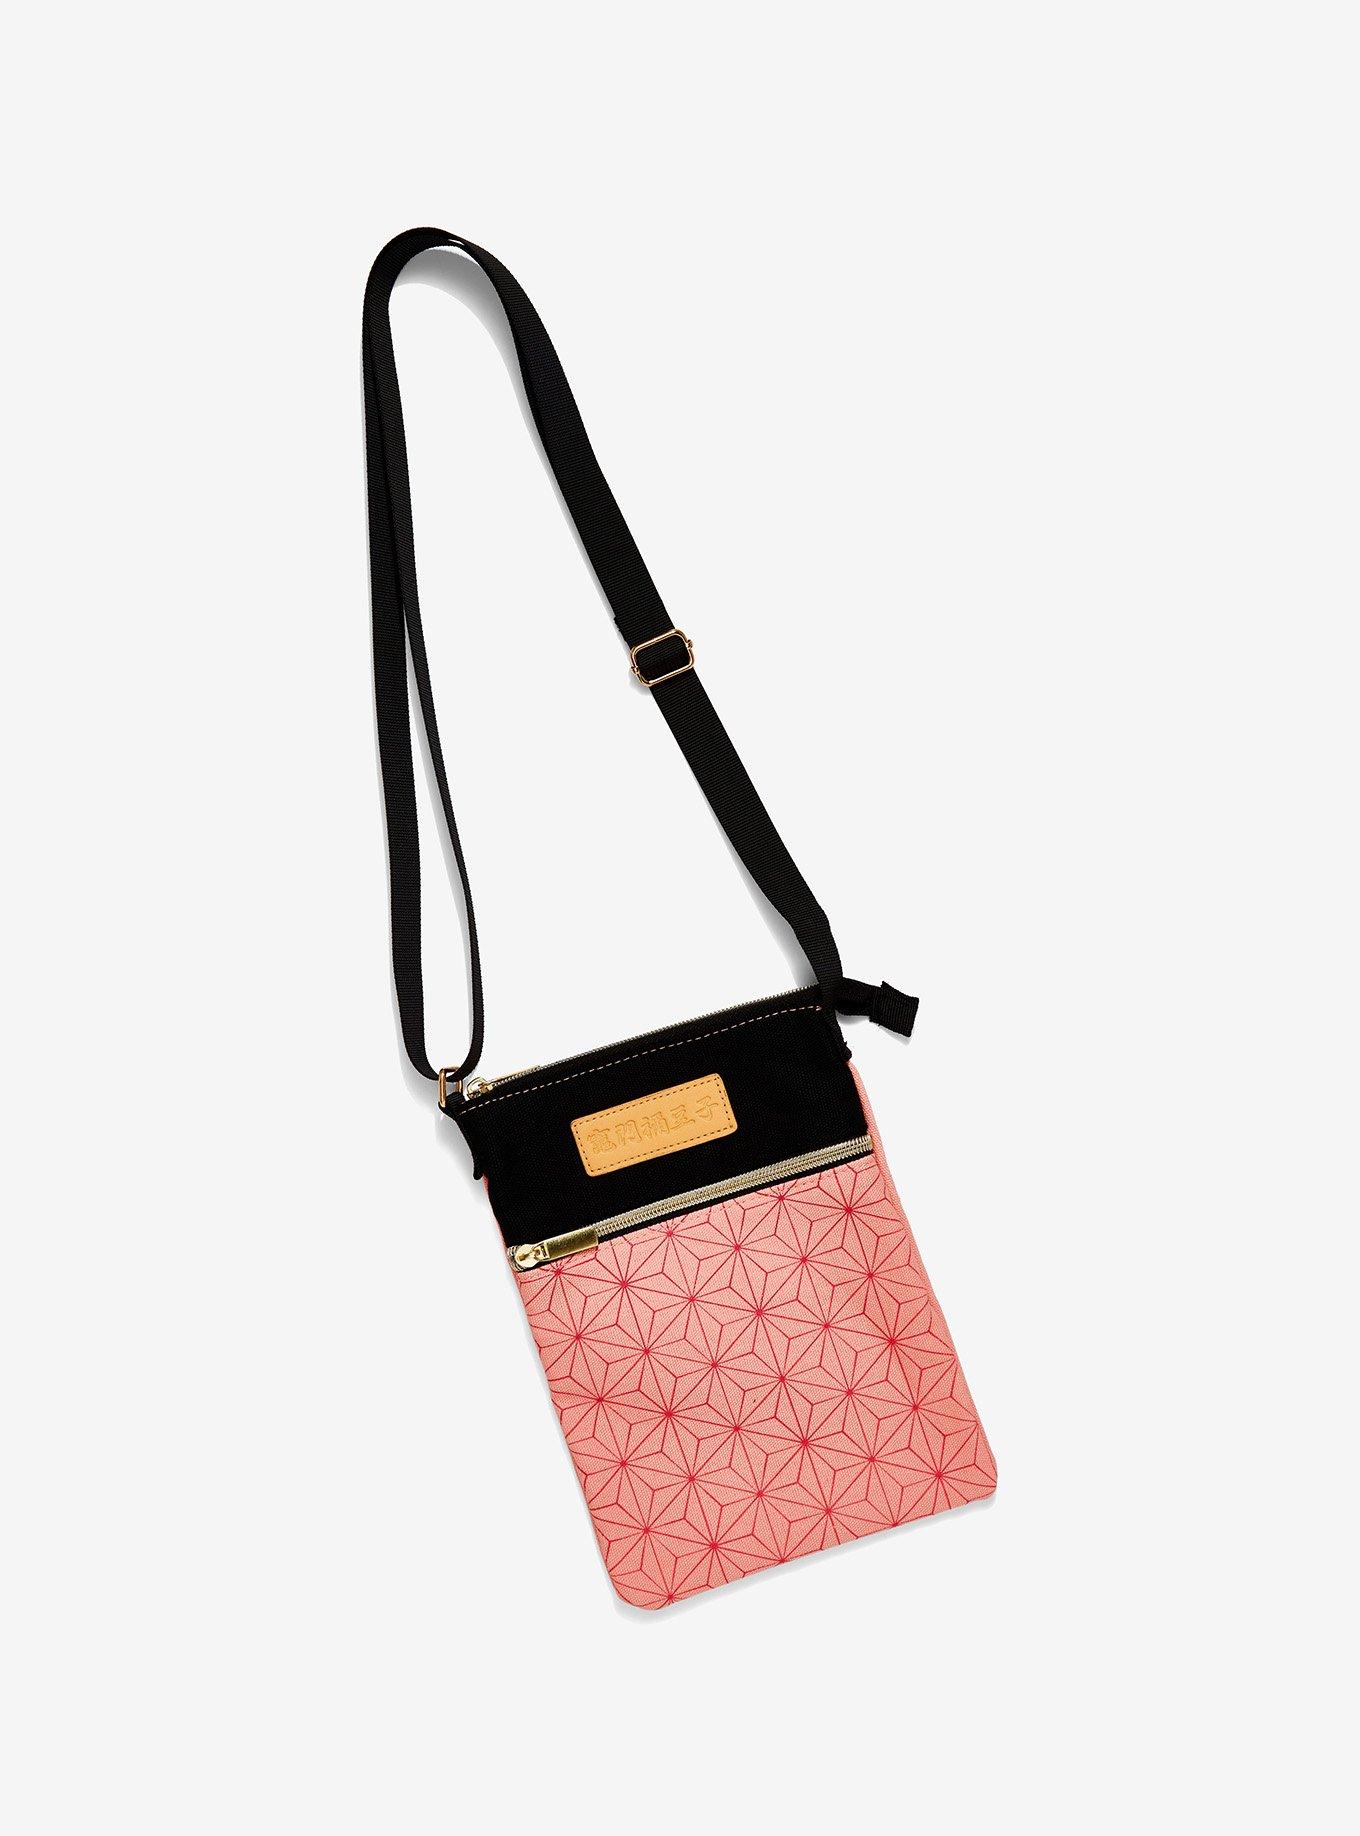  DAVID - JONES INTERNATIONAL. Crossbody Bag for Women, Small  Shoulder Purses and Handbags with Vegan Leather, Pattern Print Fashion  Gilrs Wallet Purse with Chain Strap : Clothing, Shoes & Jewelry